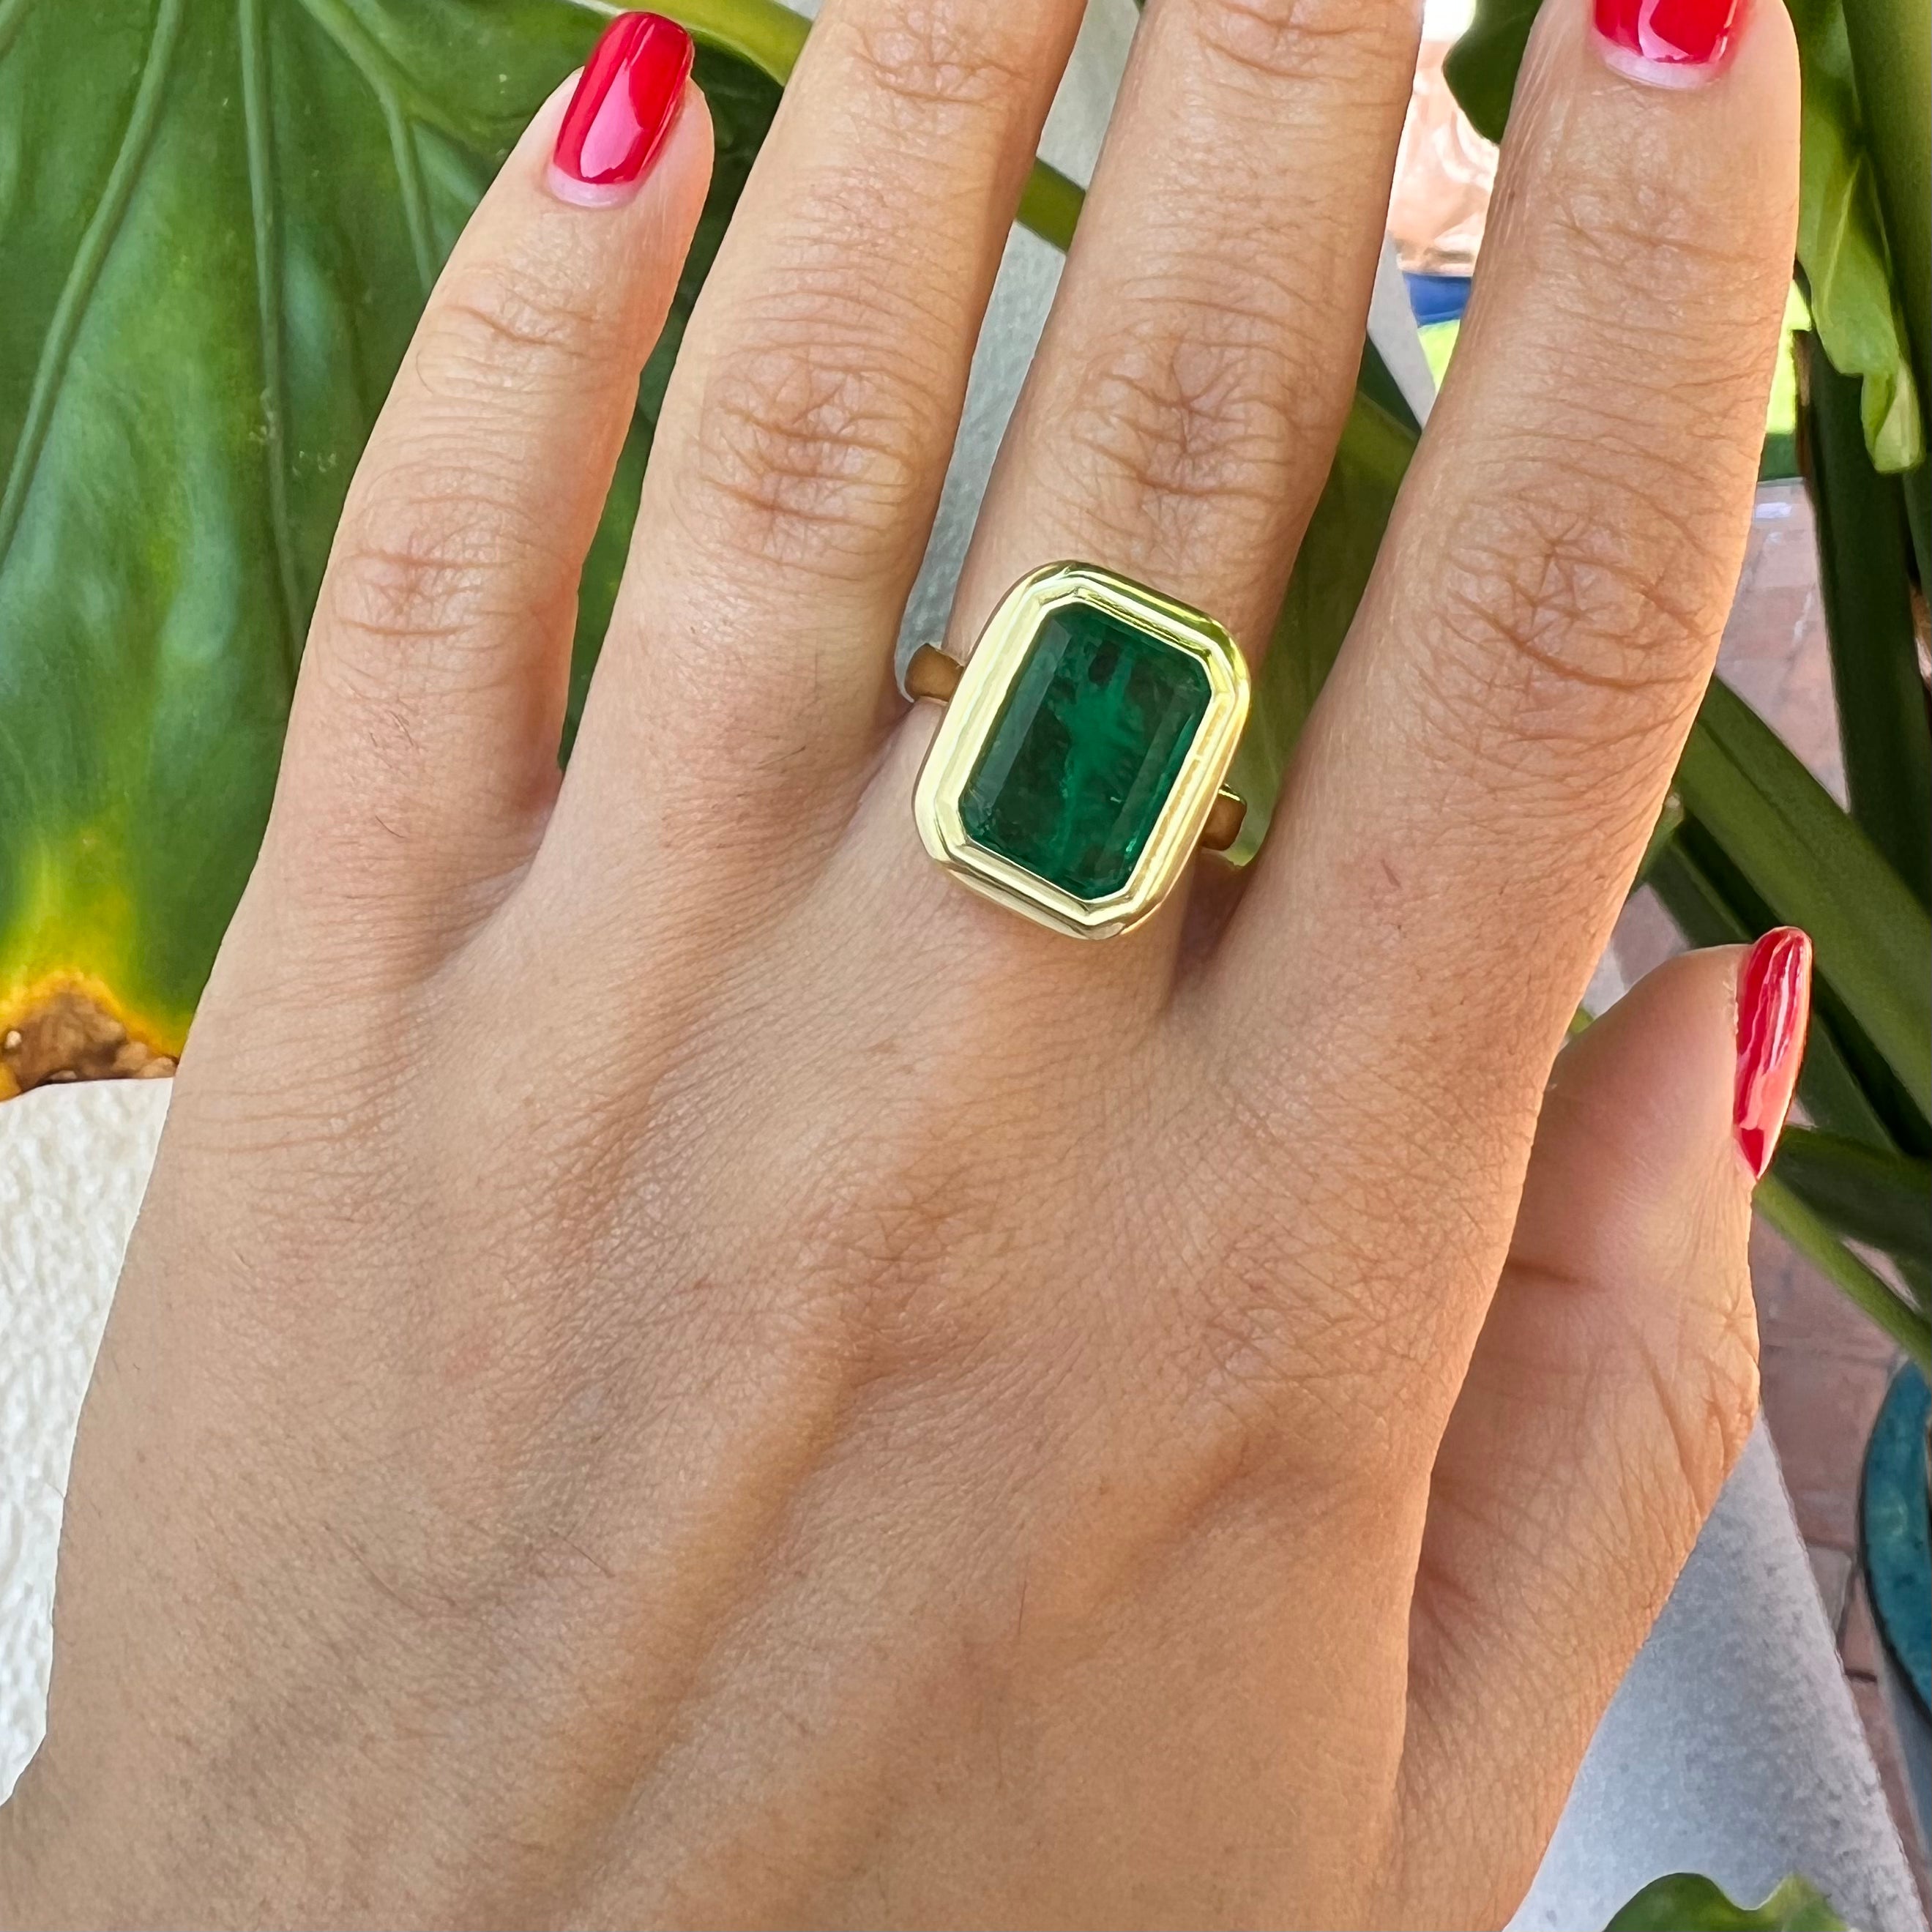 Silver gold plated large emerald cocktail ring